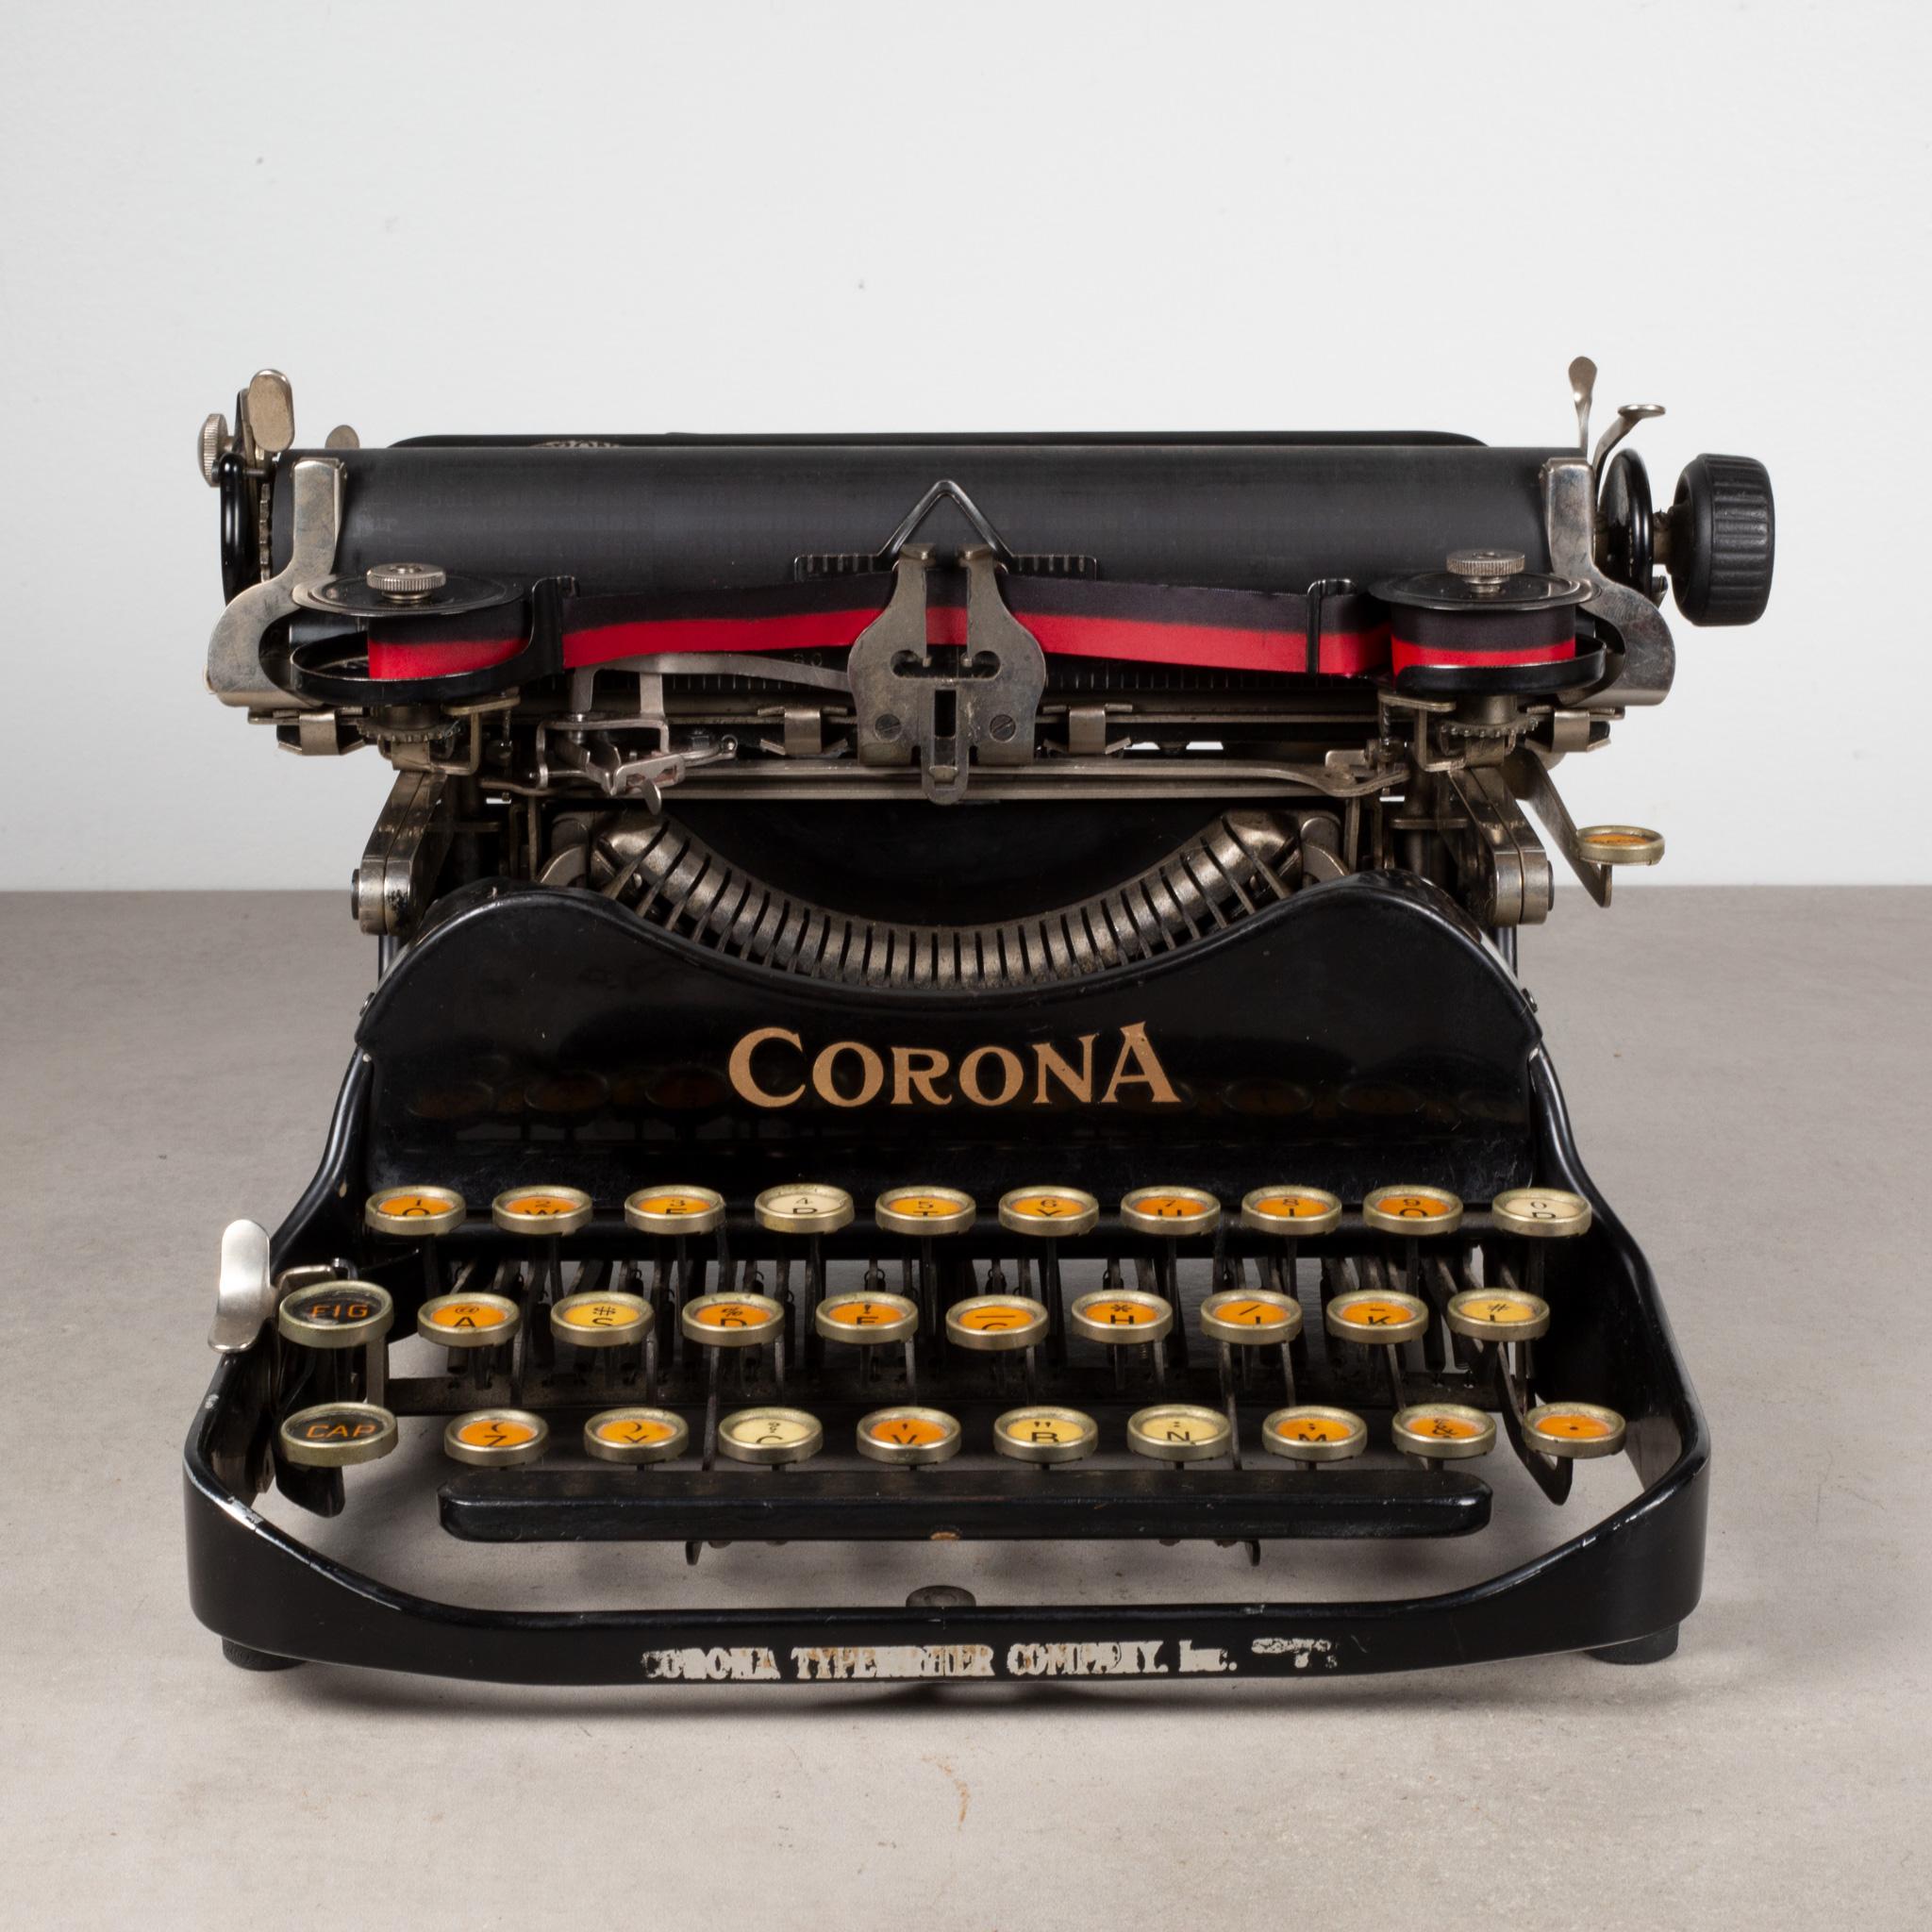 ABOUT

This is an original Corona 3 Flip Top Typewriter with original gold lettering label and nickel and glass keys. Designed smaller to be portable, the top flips over and converts to a square. This typewriter is in good working order and the